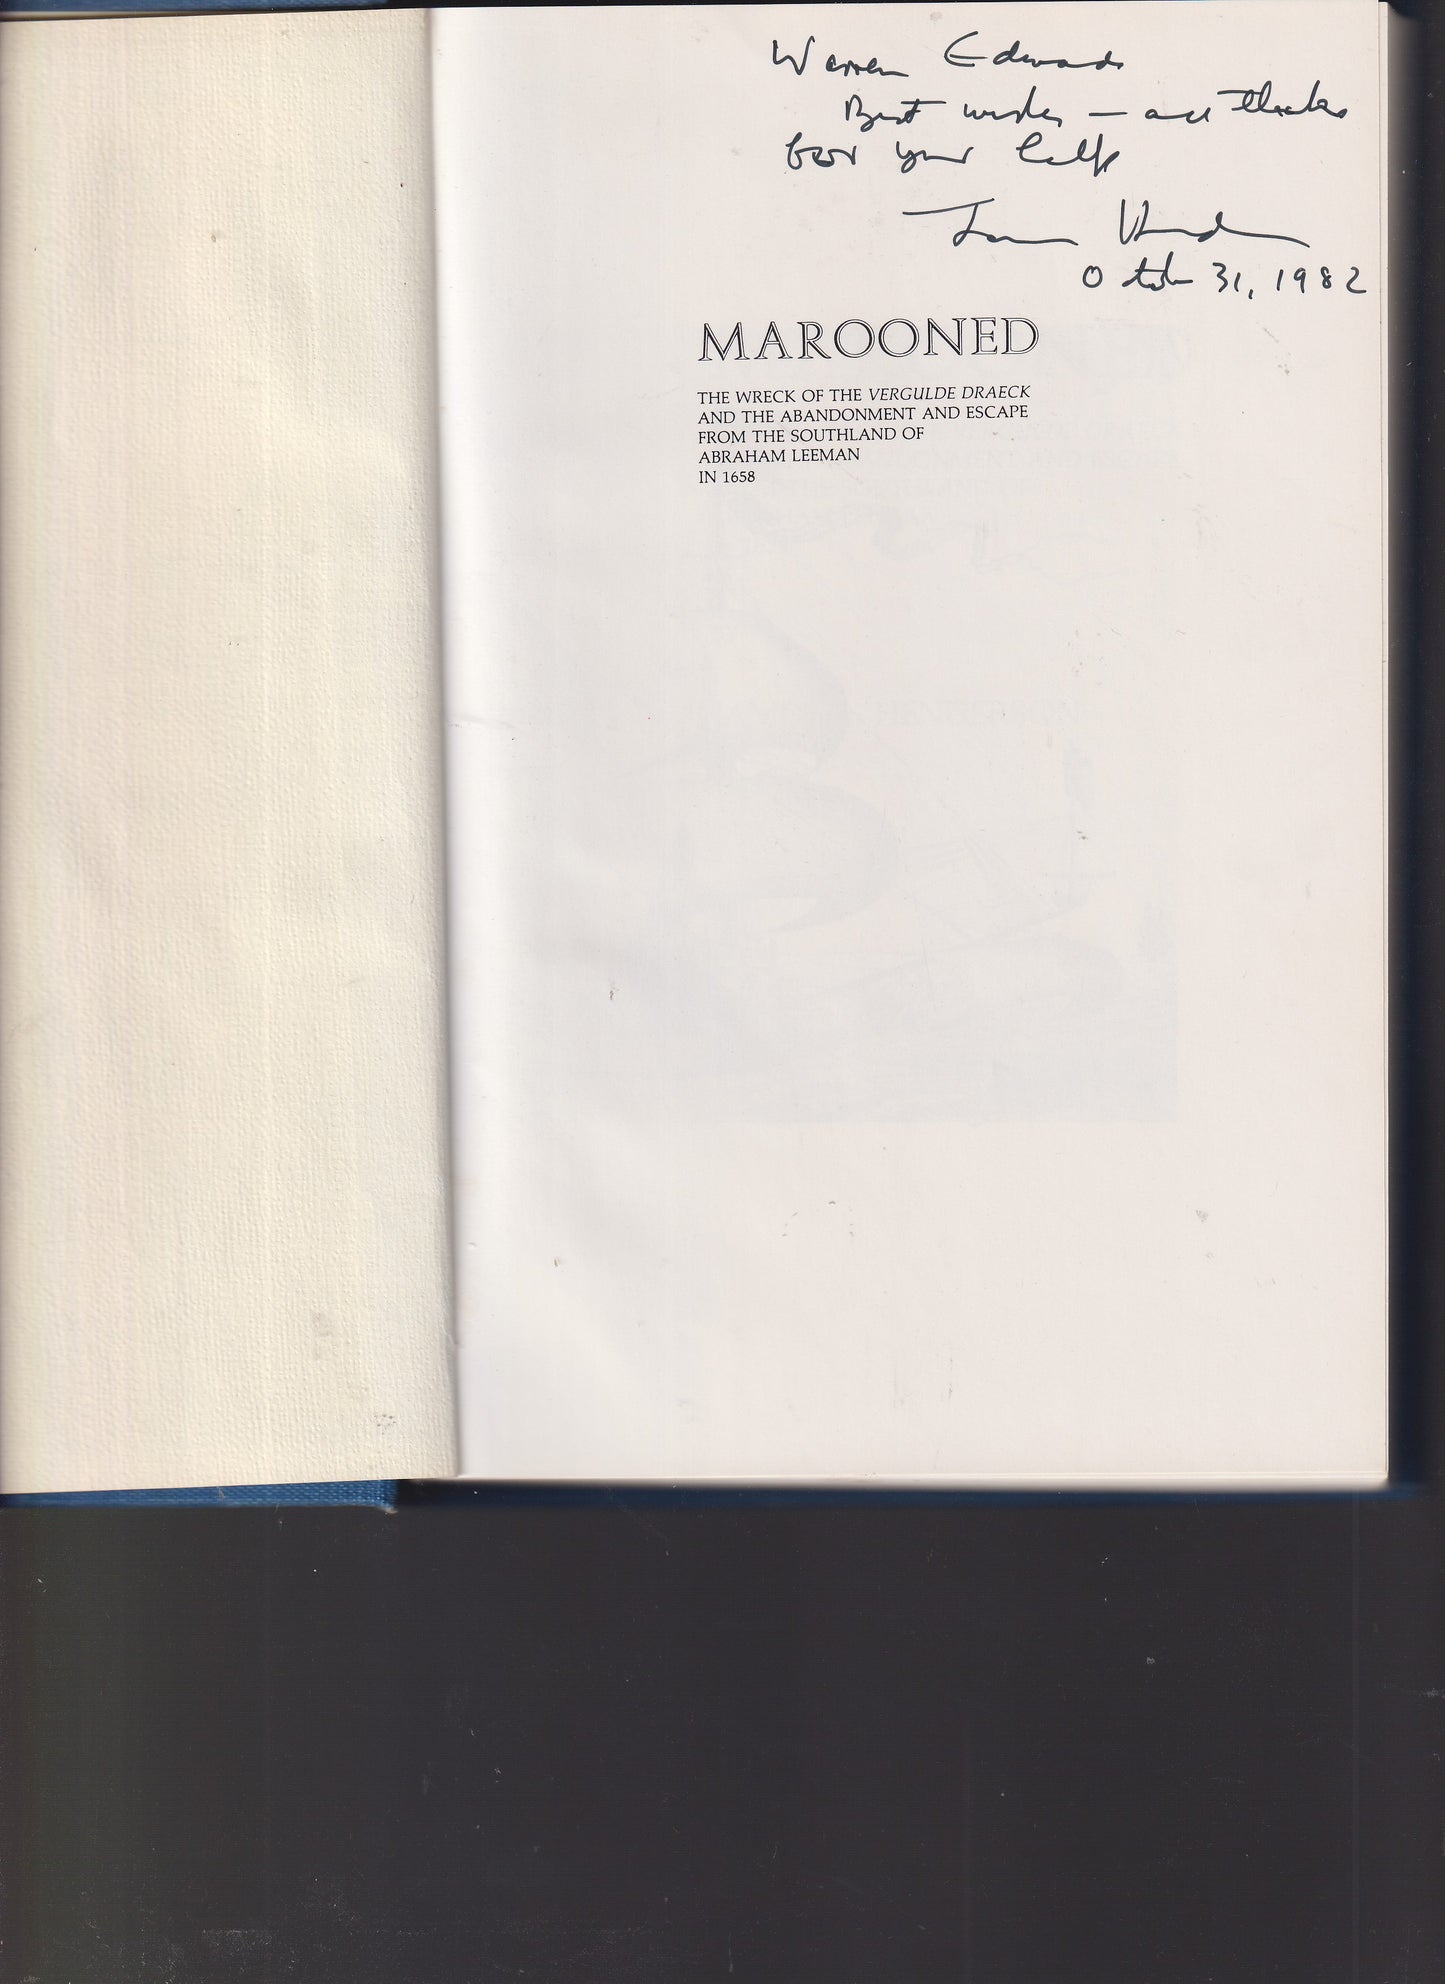 Marooned: The Wreck of the Vergulde Draeck and the Abandonment and Escape from the Southland of Abraham Leeman in 1658